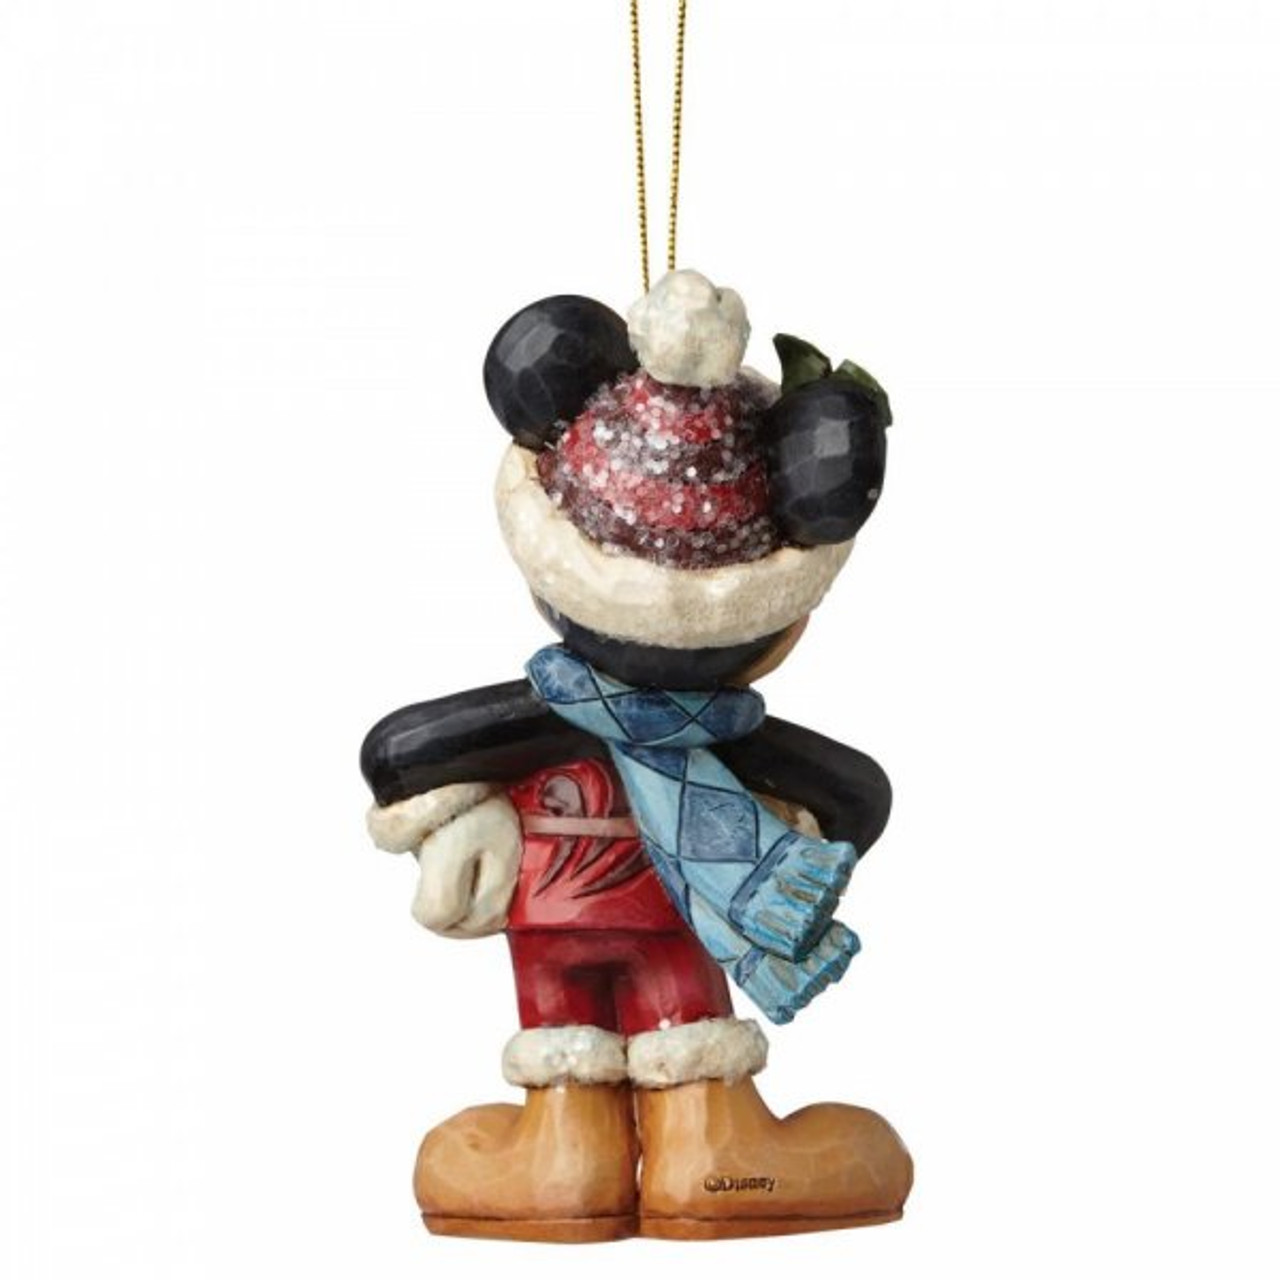 Mickey Mouse Jim Shore Juleophæng, Sugar Coated Mickey Mouse Hanging Ornament, A28239, Mickey Mouse, Mickey Mouse figur, Mickey Mouse julepynt, Mickey Mouse jul, Disney Traditions julepynt, Jim Shore juleophæng, Disney Traditions by Jim Shore, Disney figur, Disney figurer, alle Disney figurer, eventyrfigur, eventyrfigurer, eventyrlig figur, eventyrlige figurer, magisk figur, magiske figurer, Disney jul, Disney julepynt, Disney ornament, Disney juleophæng, Disney shop, Disney butik, Disney butikDK, Disney butik I Danmark, juletræspynt, jul, julepynt, juleophæng, julekugle, Disney julekugle, fra alle os til alle jer, Disney juleshow, højtid, julefigur, julefigurer, julegave, gaveide, Disney gave, Disney julegave, julepynt, en fortryllende jul, en magisk jul, Fra alle os til alle jer, Disney Juleshow,